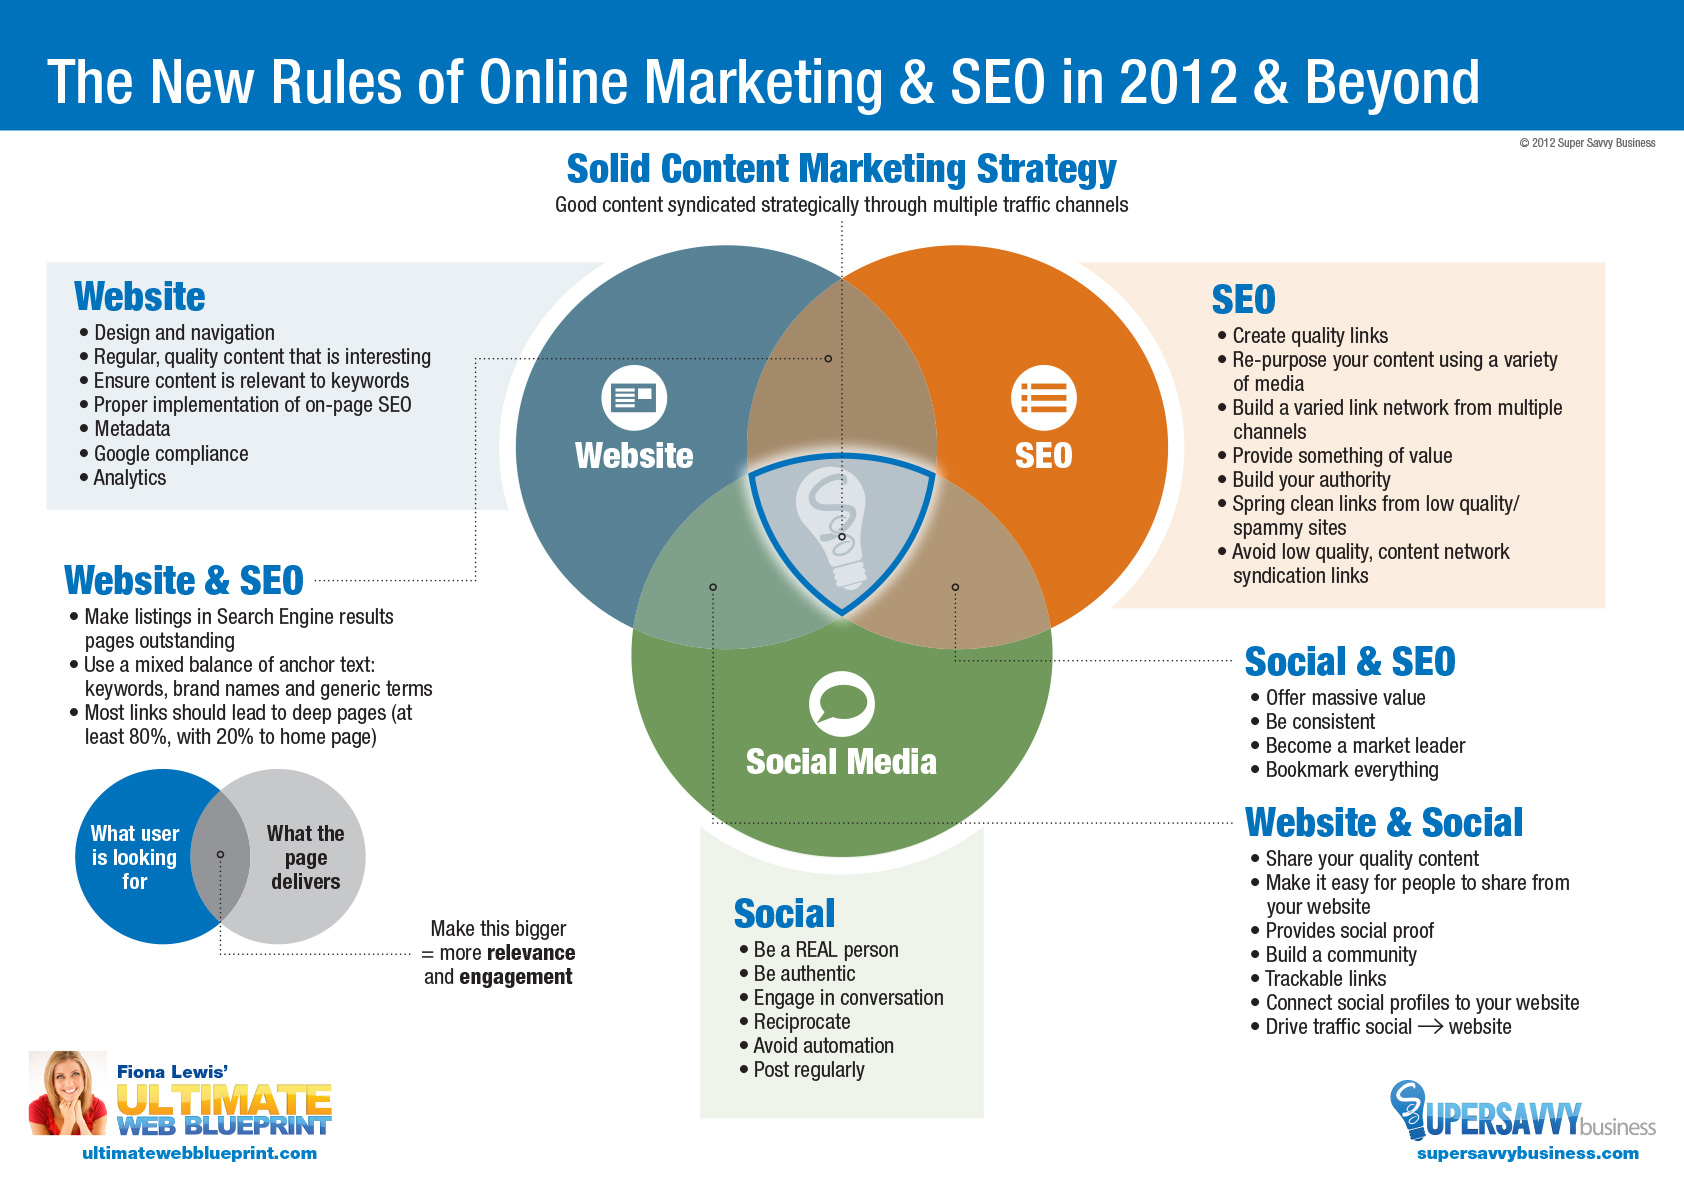 The New Rules of Online Marketing & SEO in 2012 & Beyond